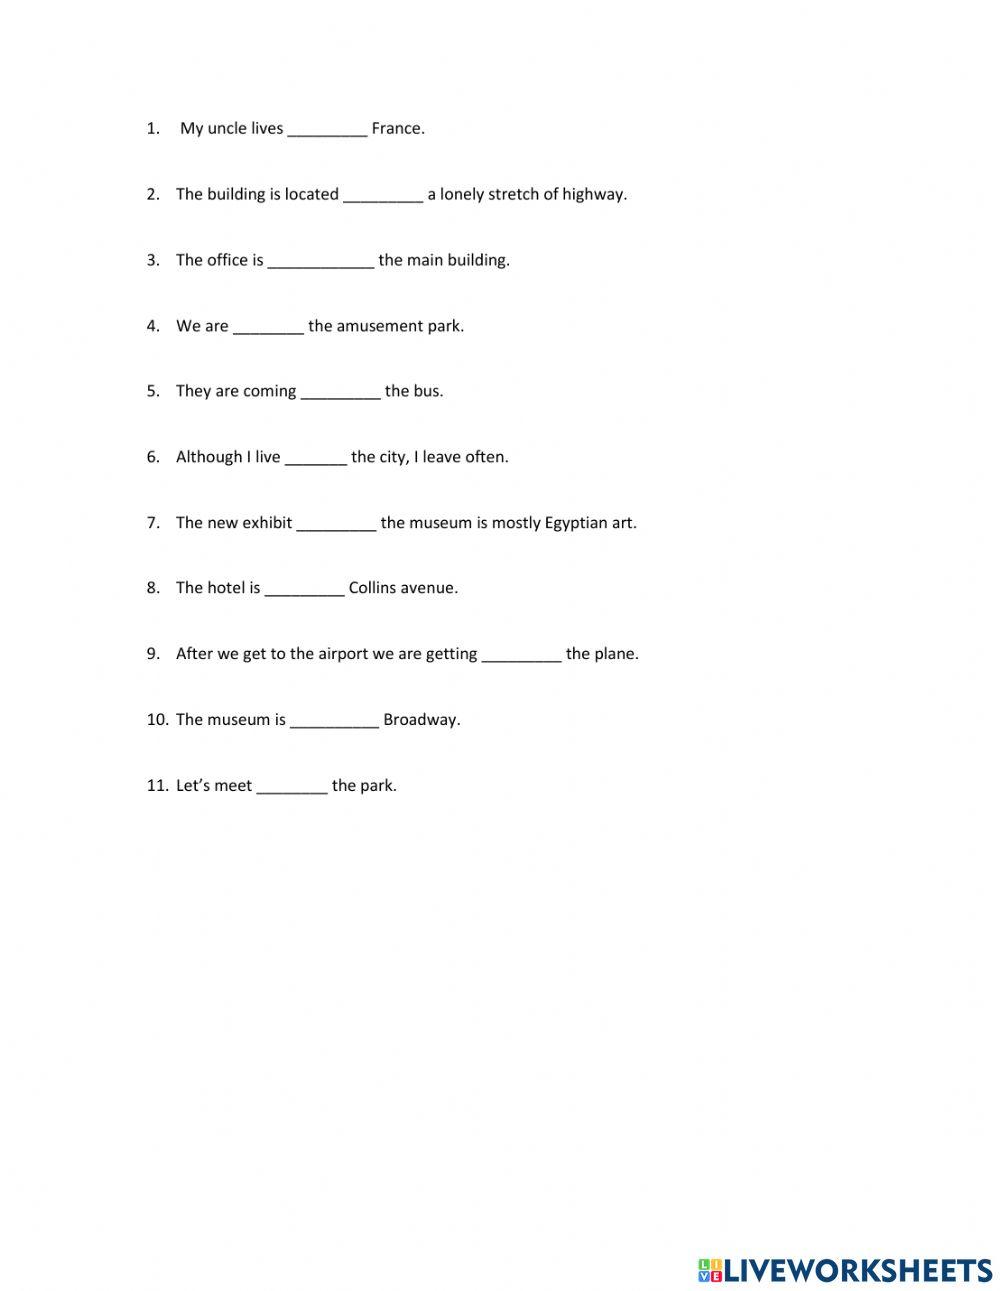 Prepositions exercise